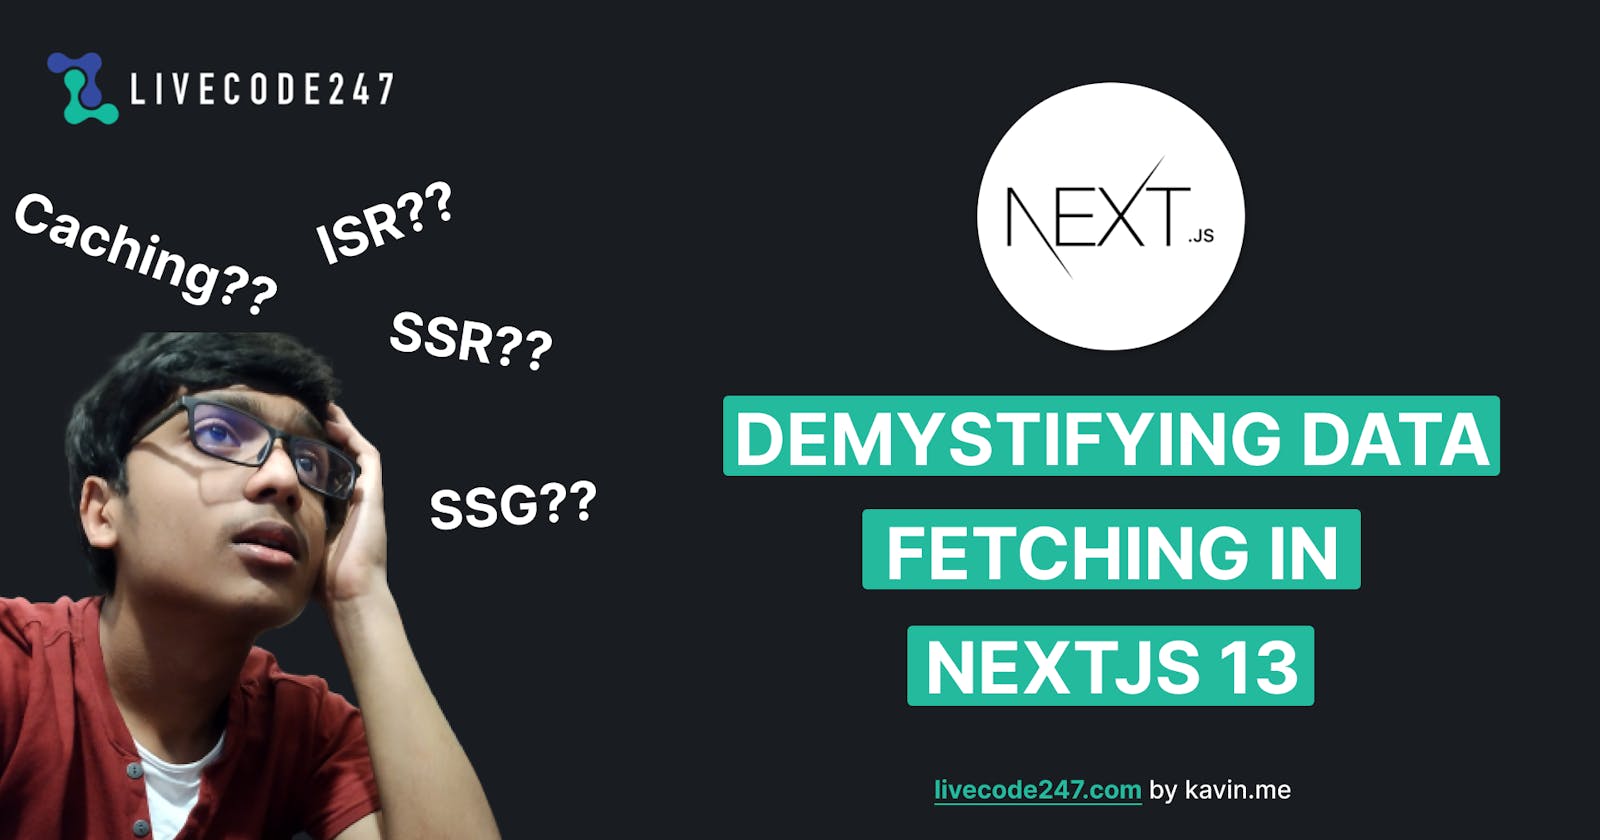 Master NextJS 13 Data Fetching with this Step-by-Step Guide